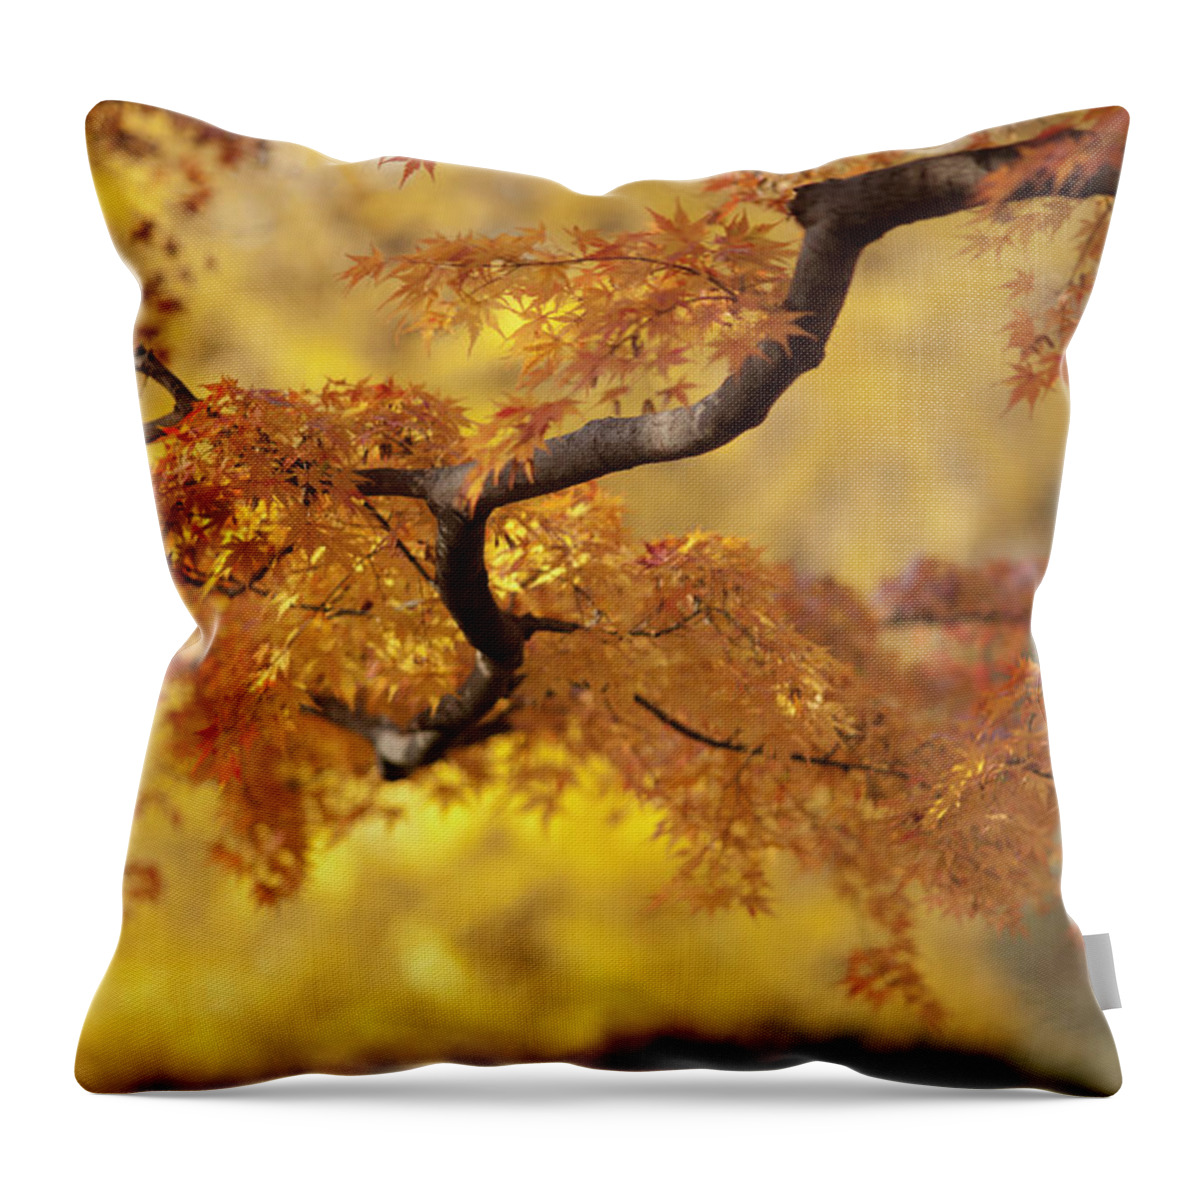 Orange Color Throw Pillow featuring the photograph Branch Of Japanese Maple In Autumn by Benjamin Torode